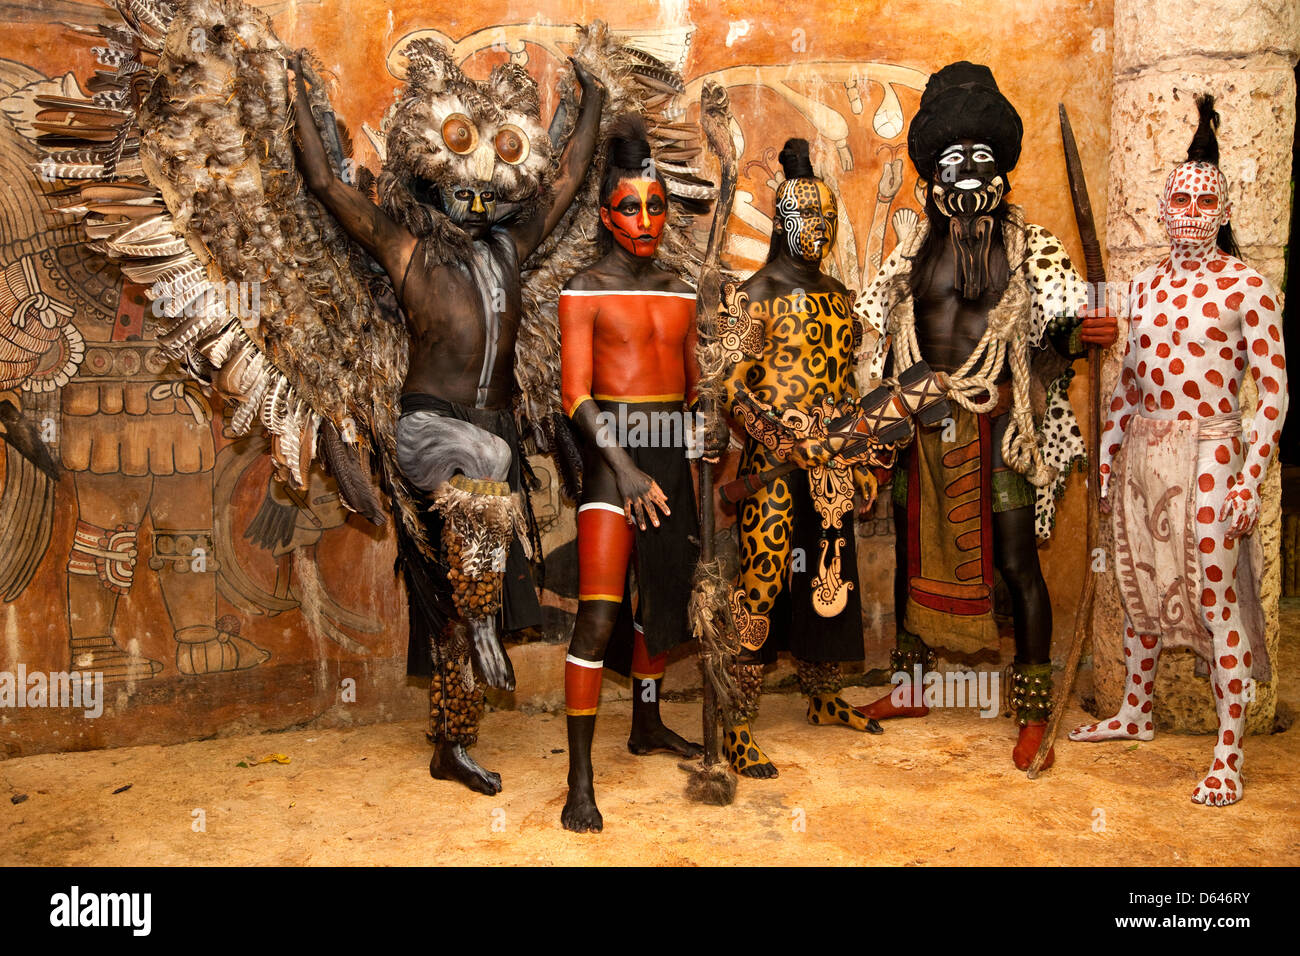 Dancers Representing Mayan Mythological Creatures, see description info. Stock Photo